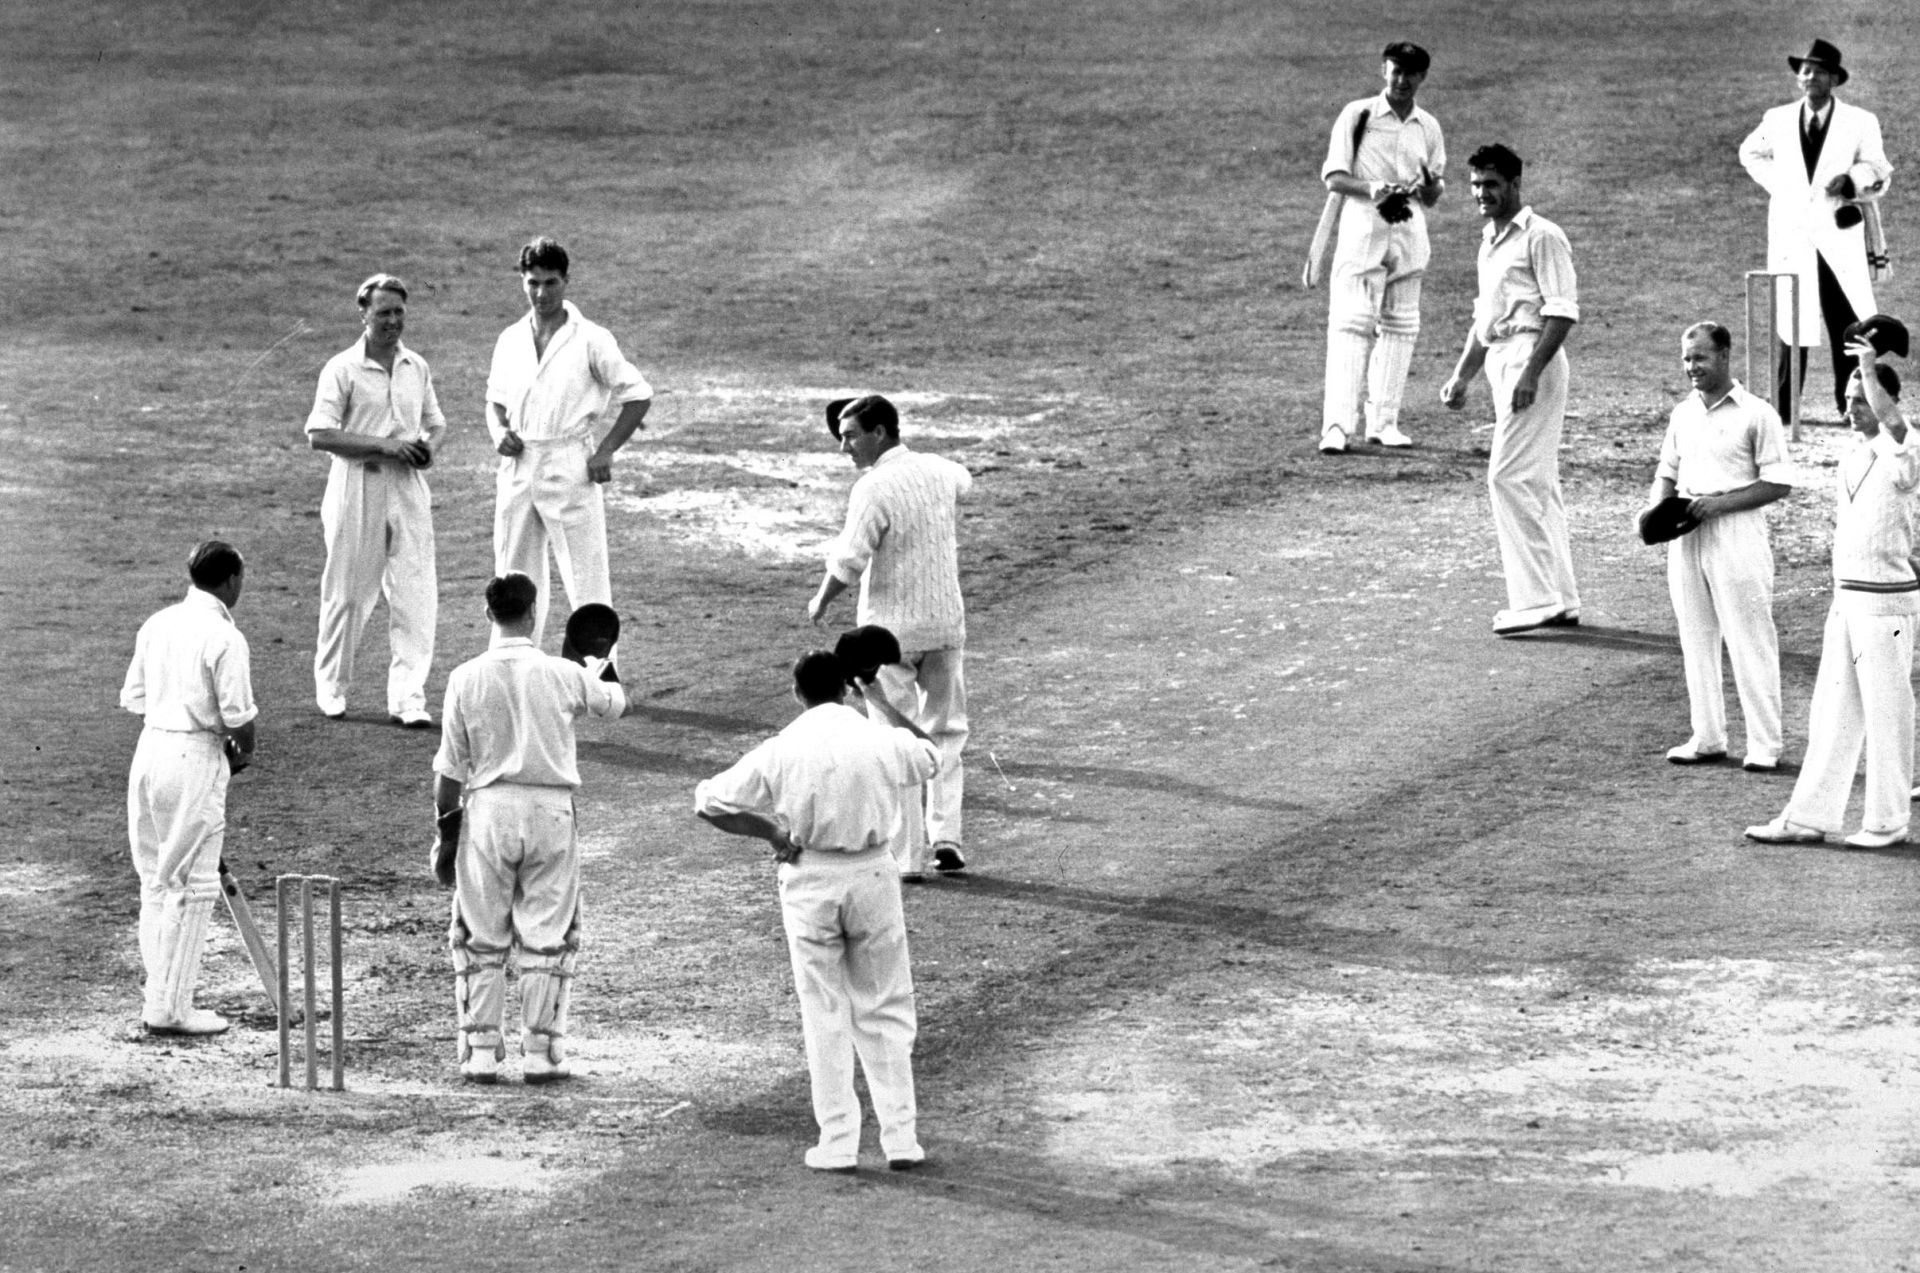 Sir Don Bradman receiving the ovation of English players after walking out to bat in his final Test innings (Image: ICC)